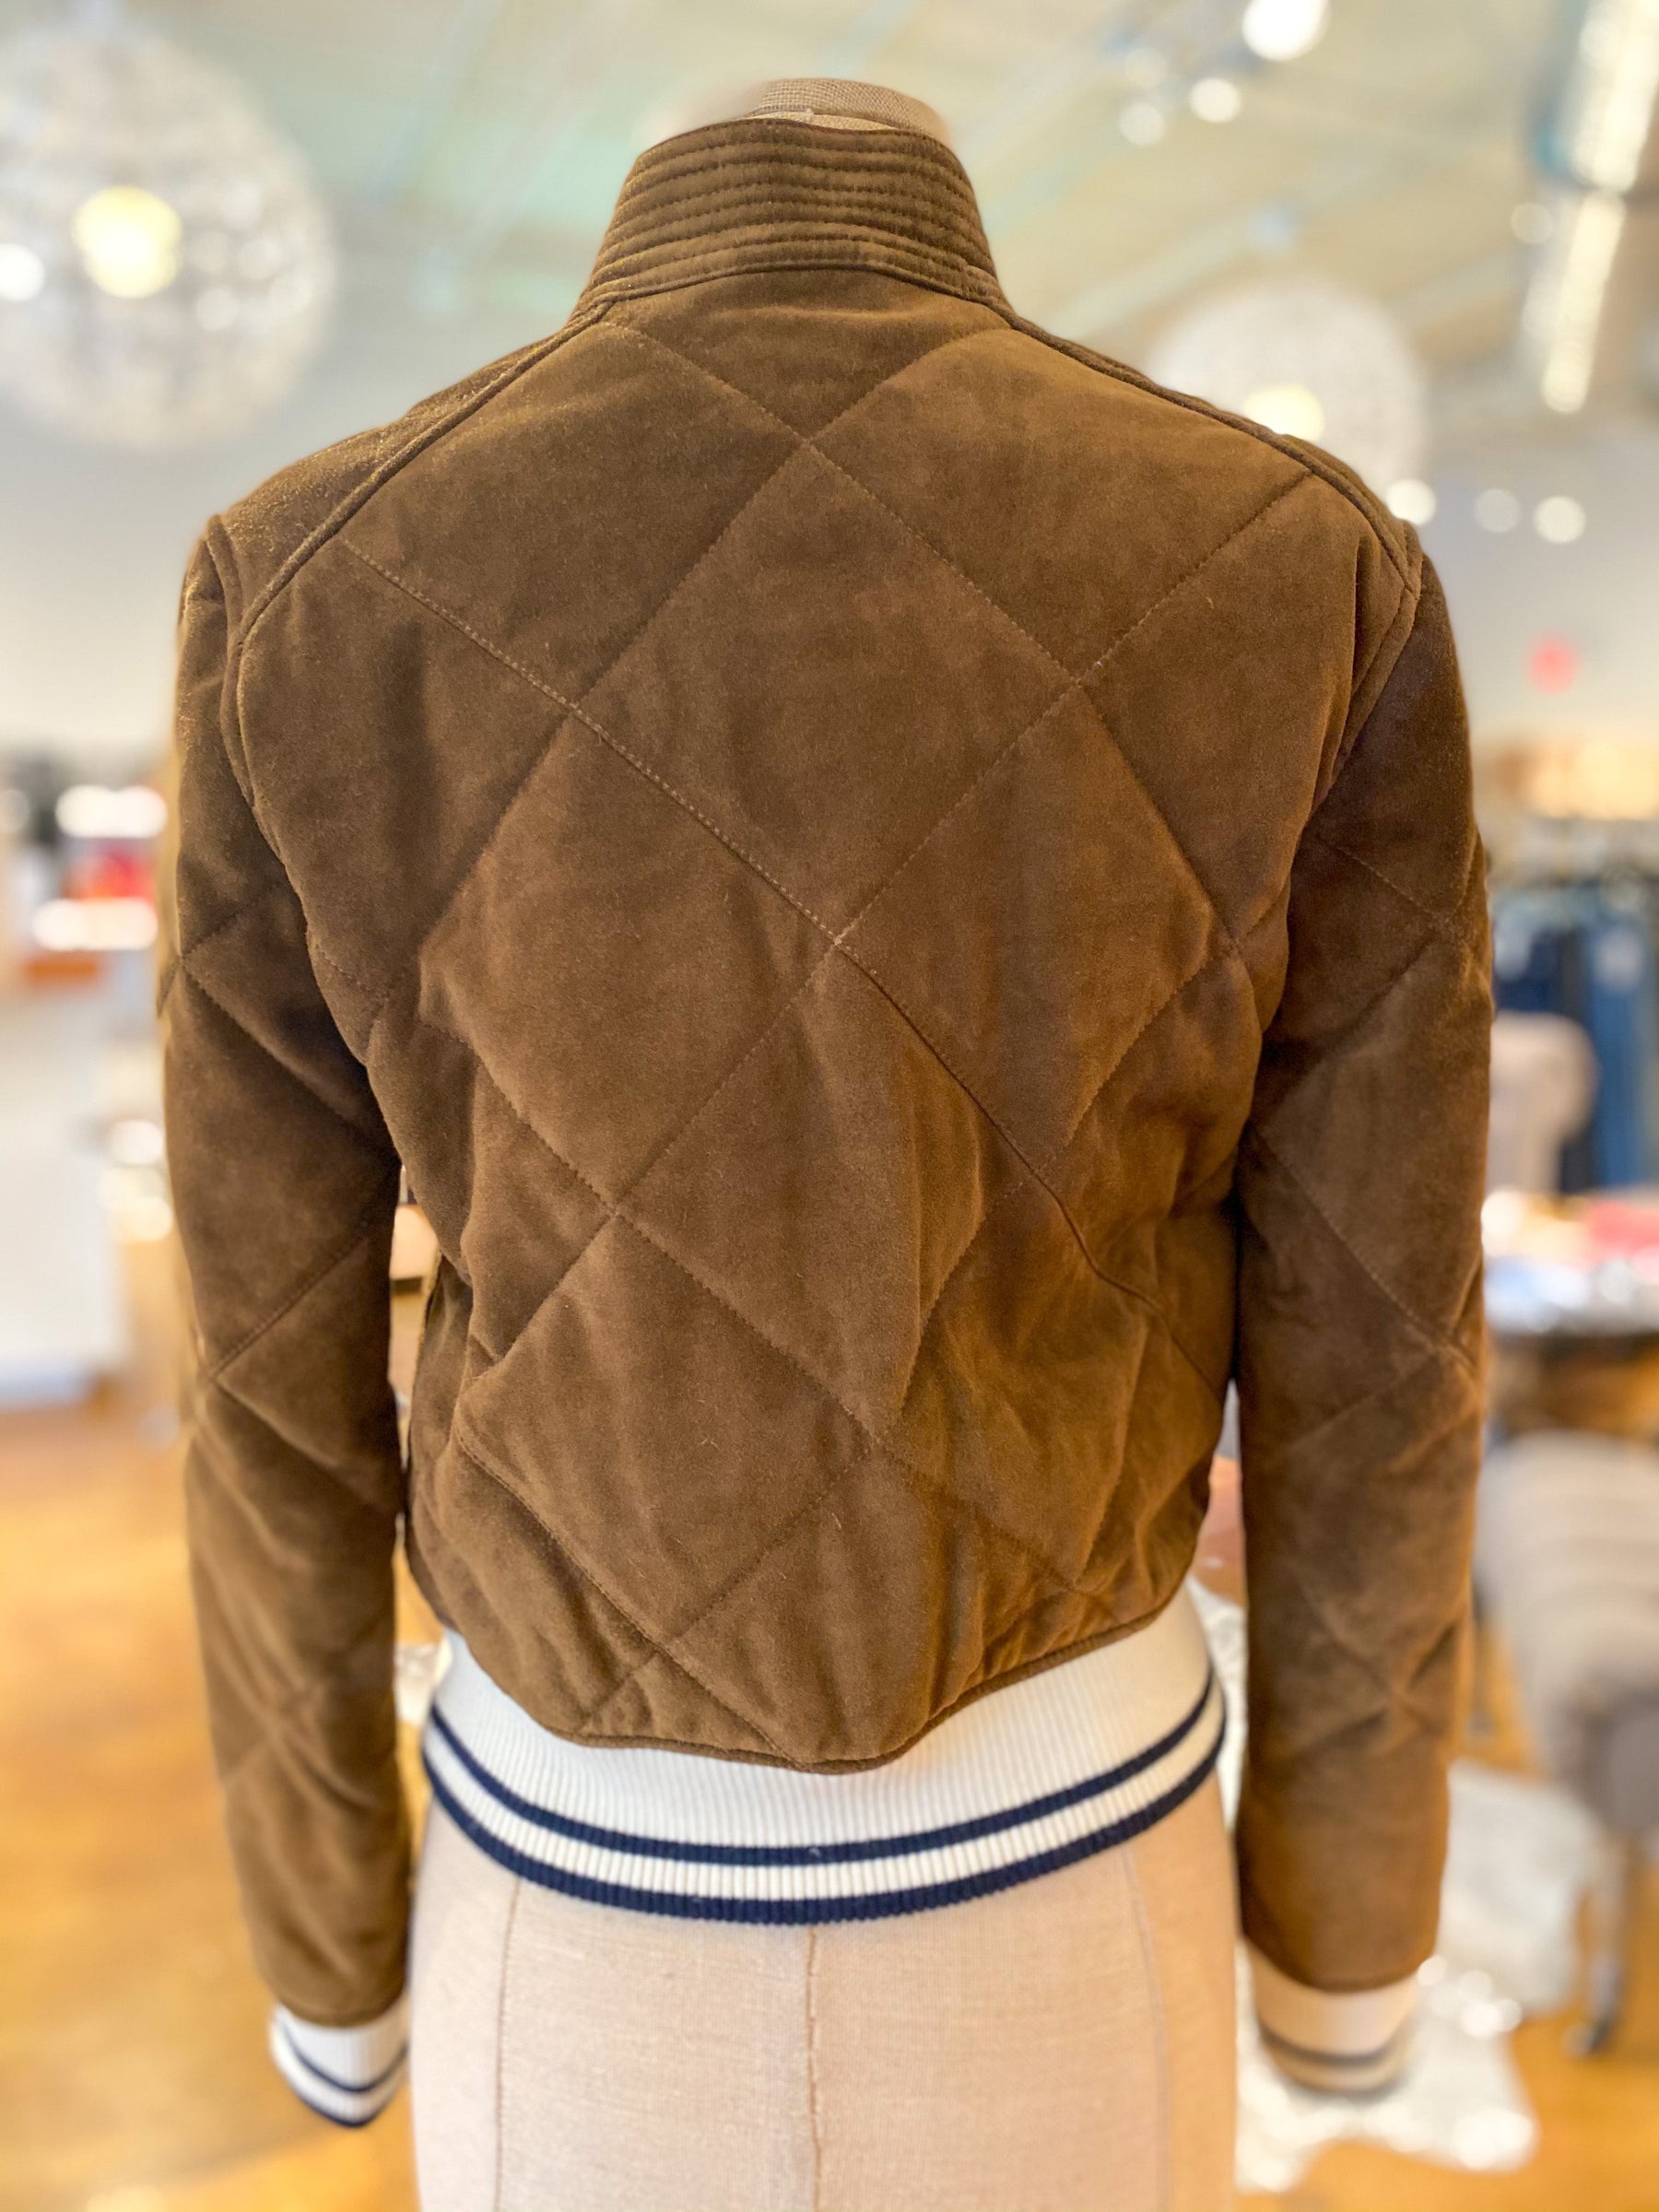 Tory Burch Suede Bomber Jacket